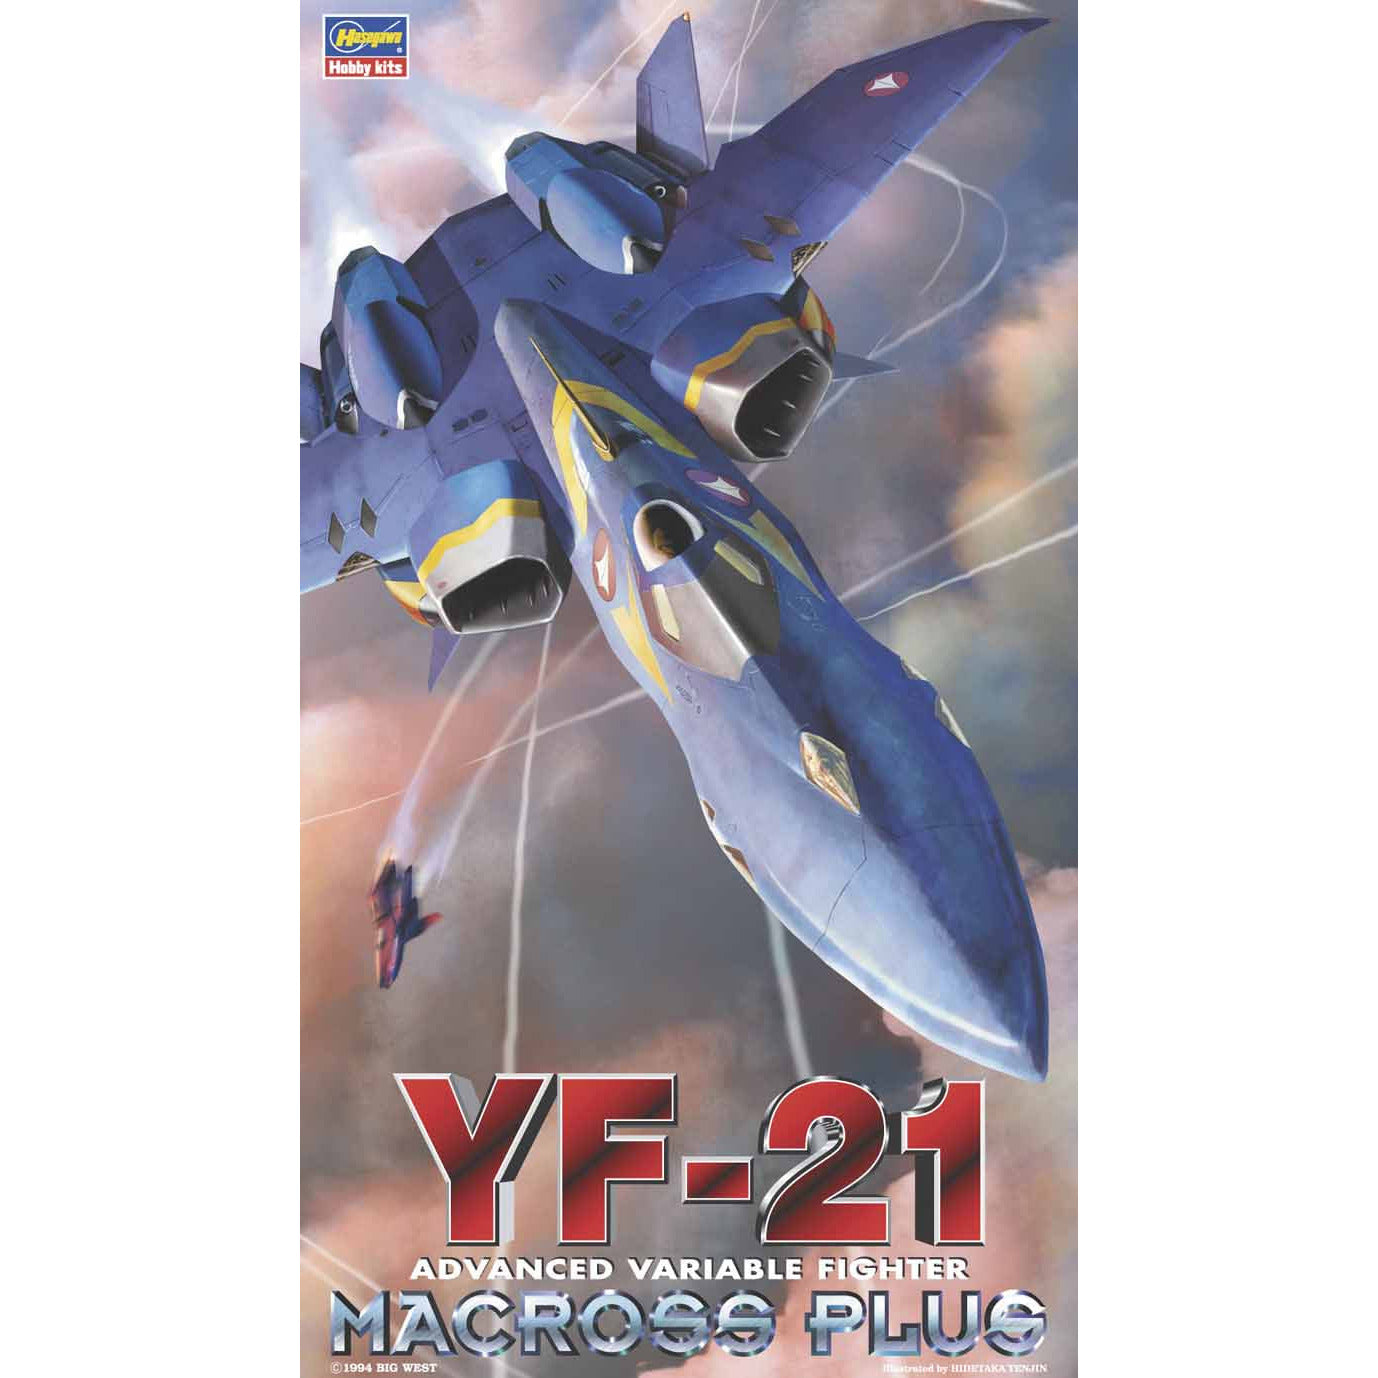 Macross Plus YF-21 Advanced Variable Fighter 1/72 #65711 by Hasegawa